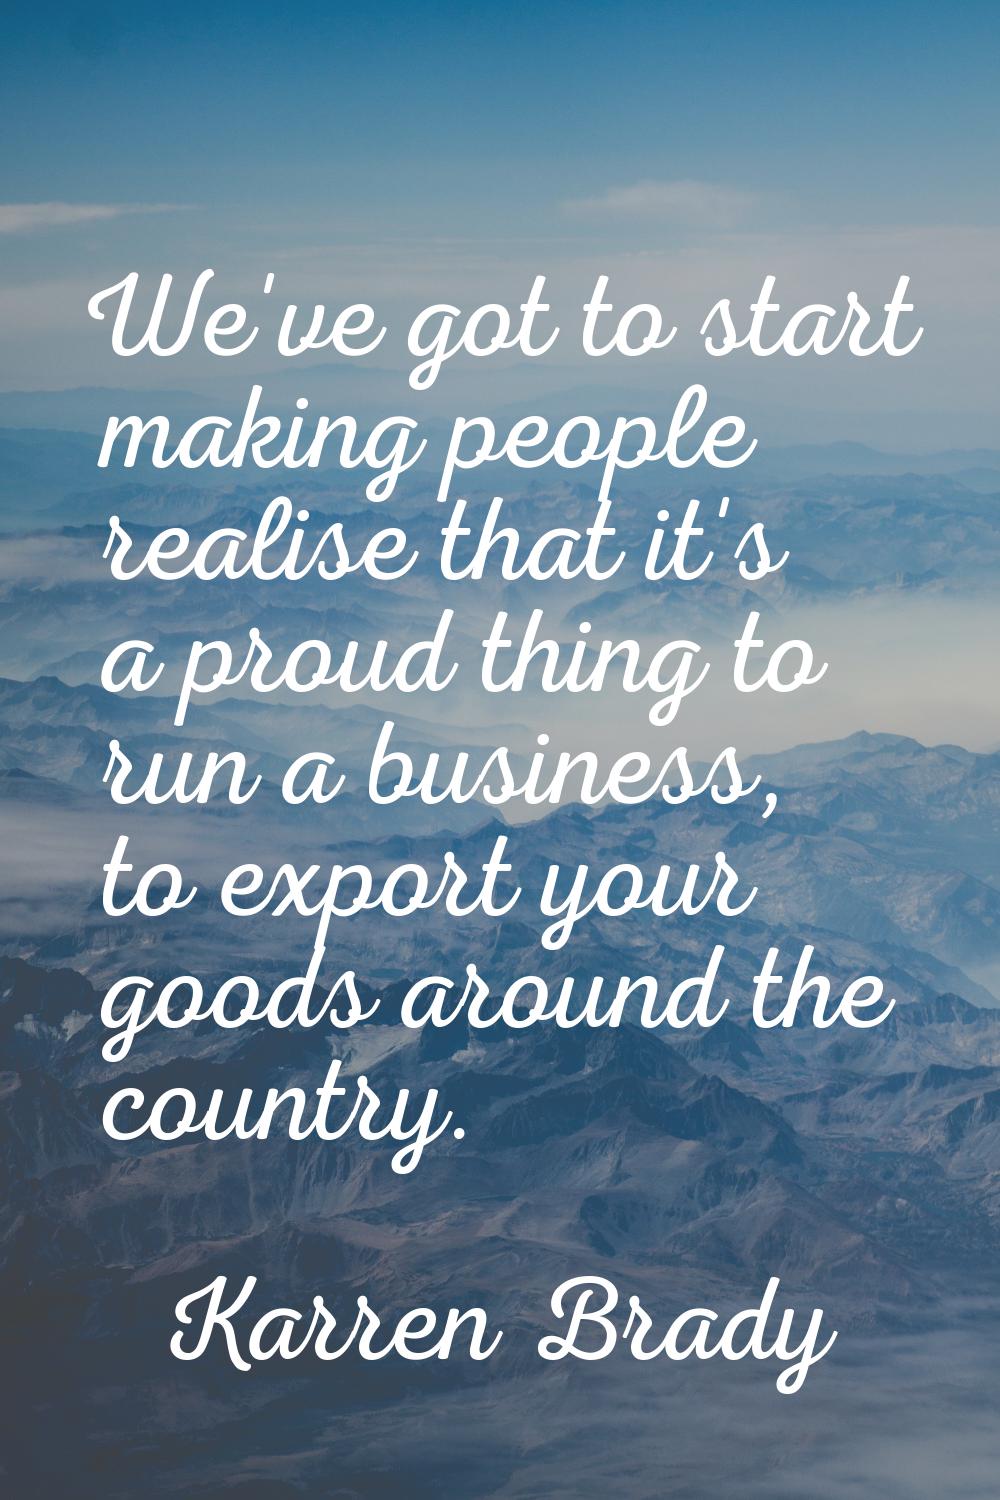 We've got to start making people realise that it's a proud thing to run a business, to export your 